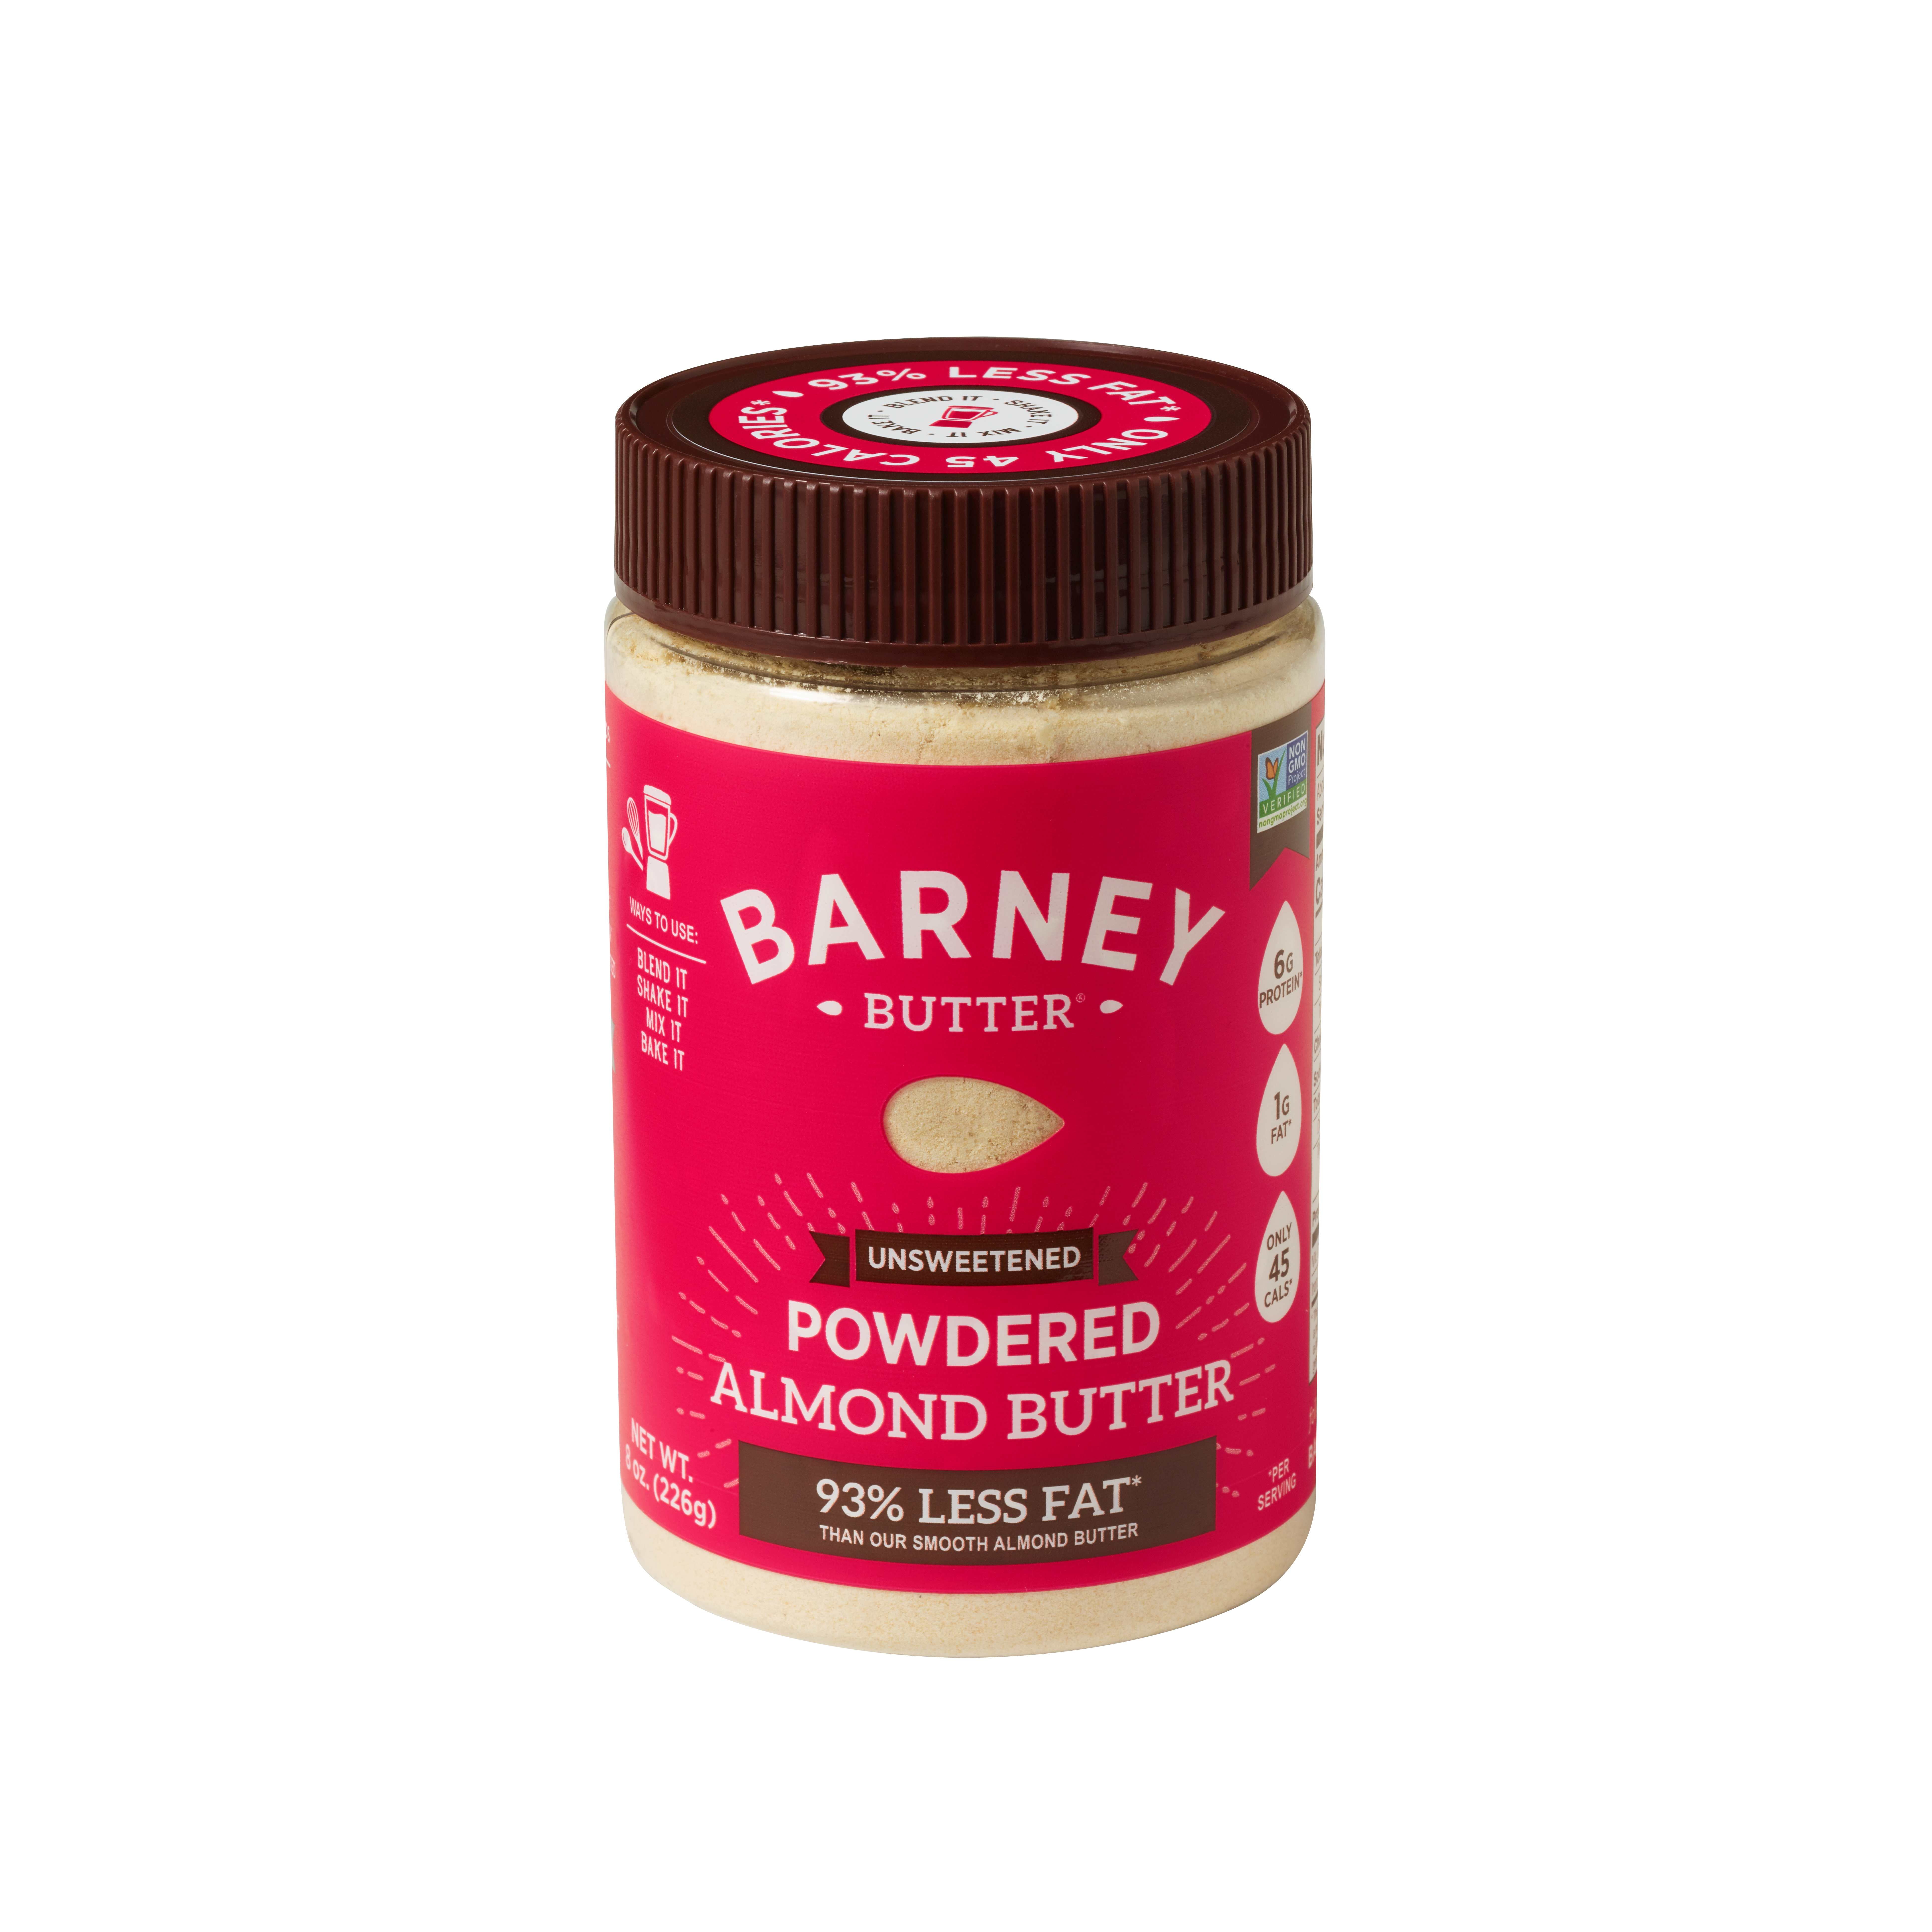 Barney Butter Unsweetened Powdered Almond Butters, 8oz